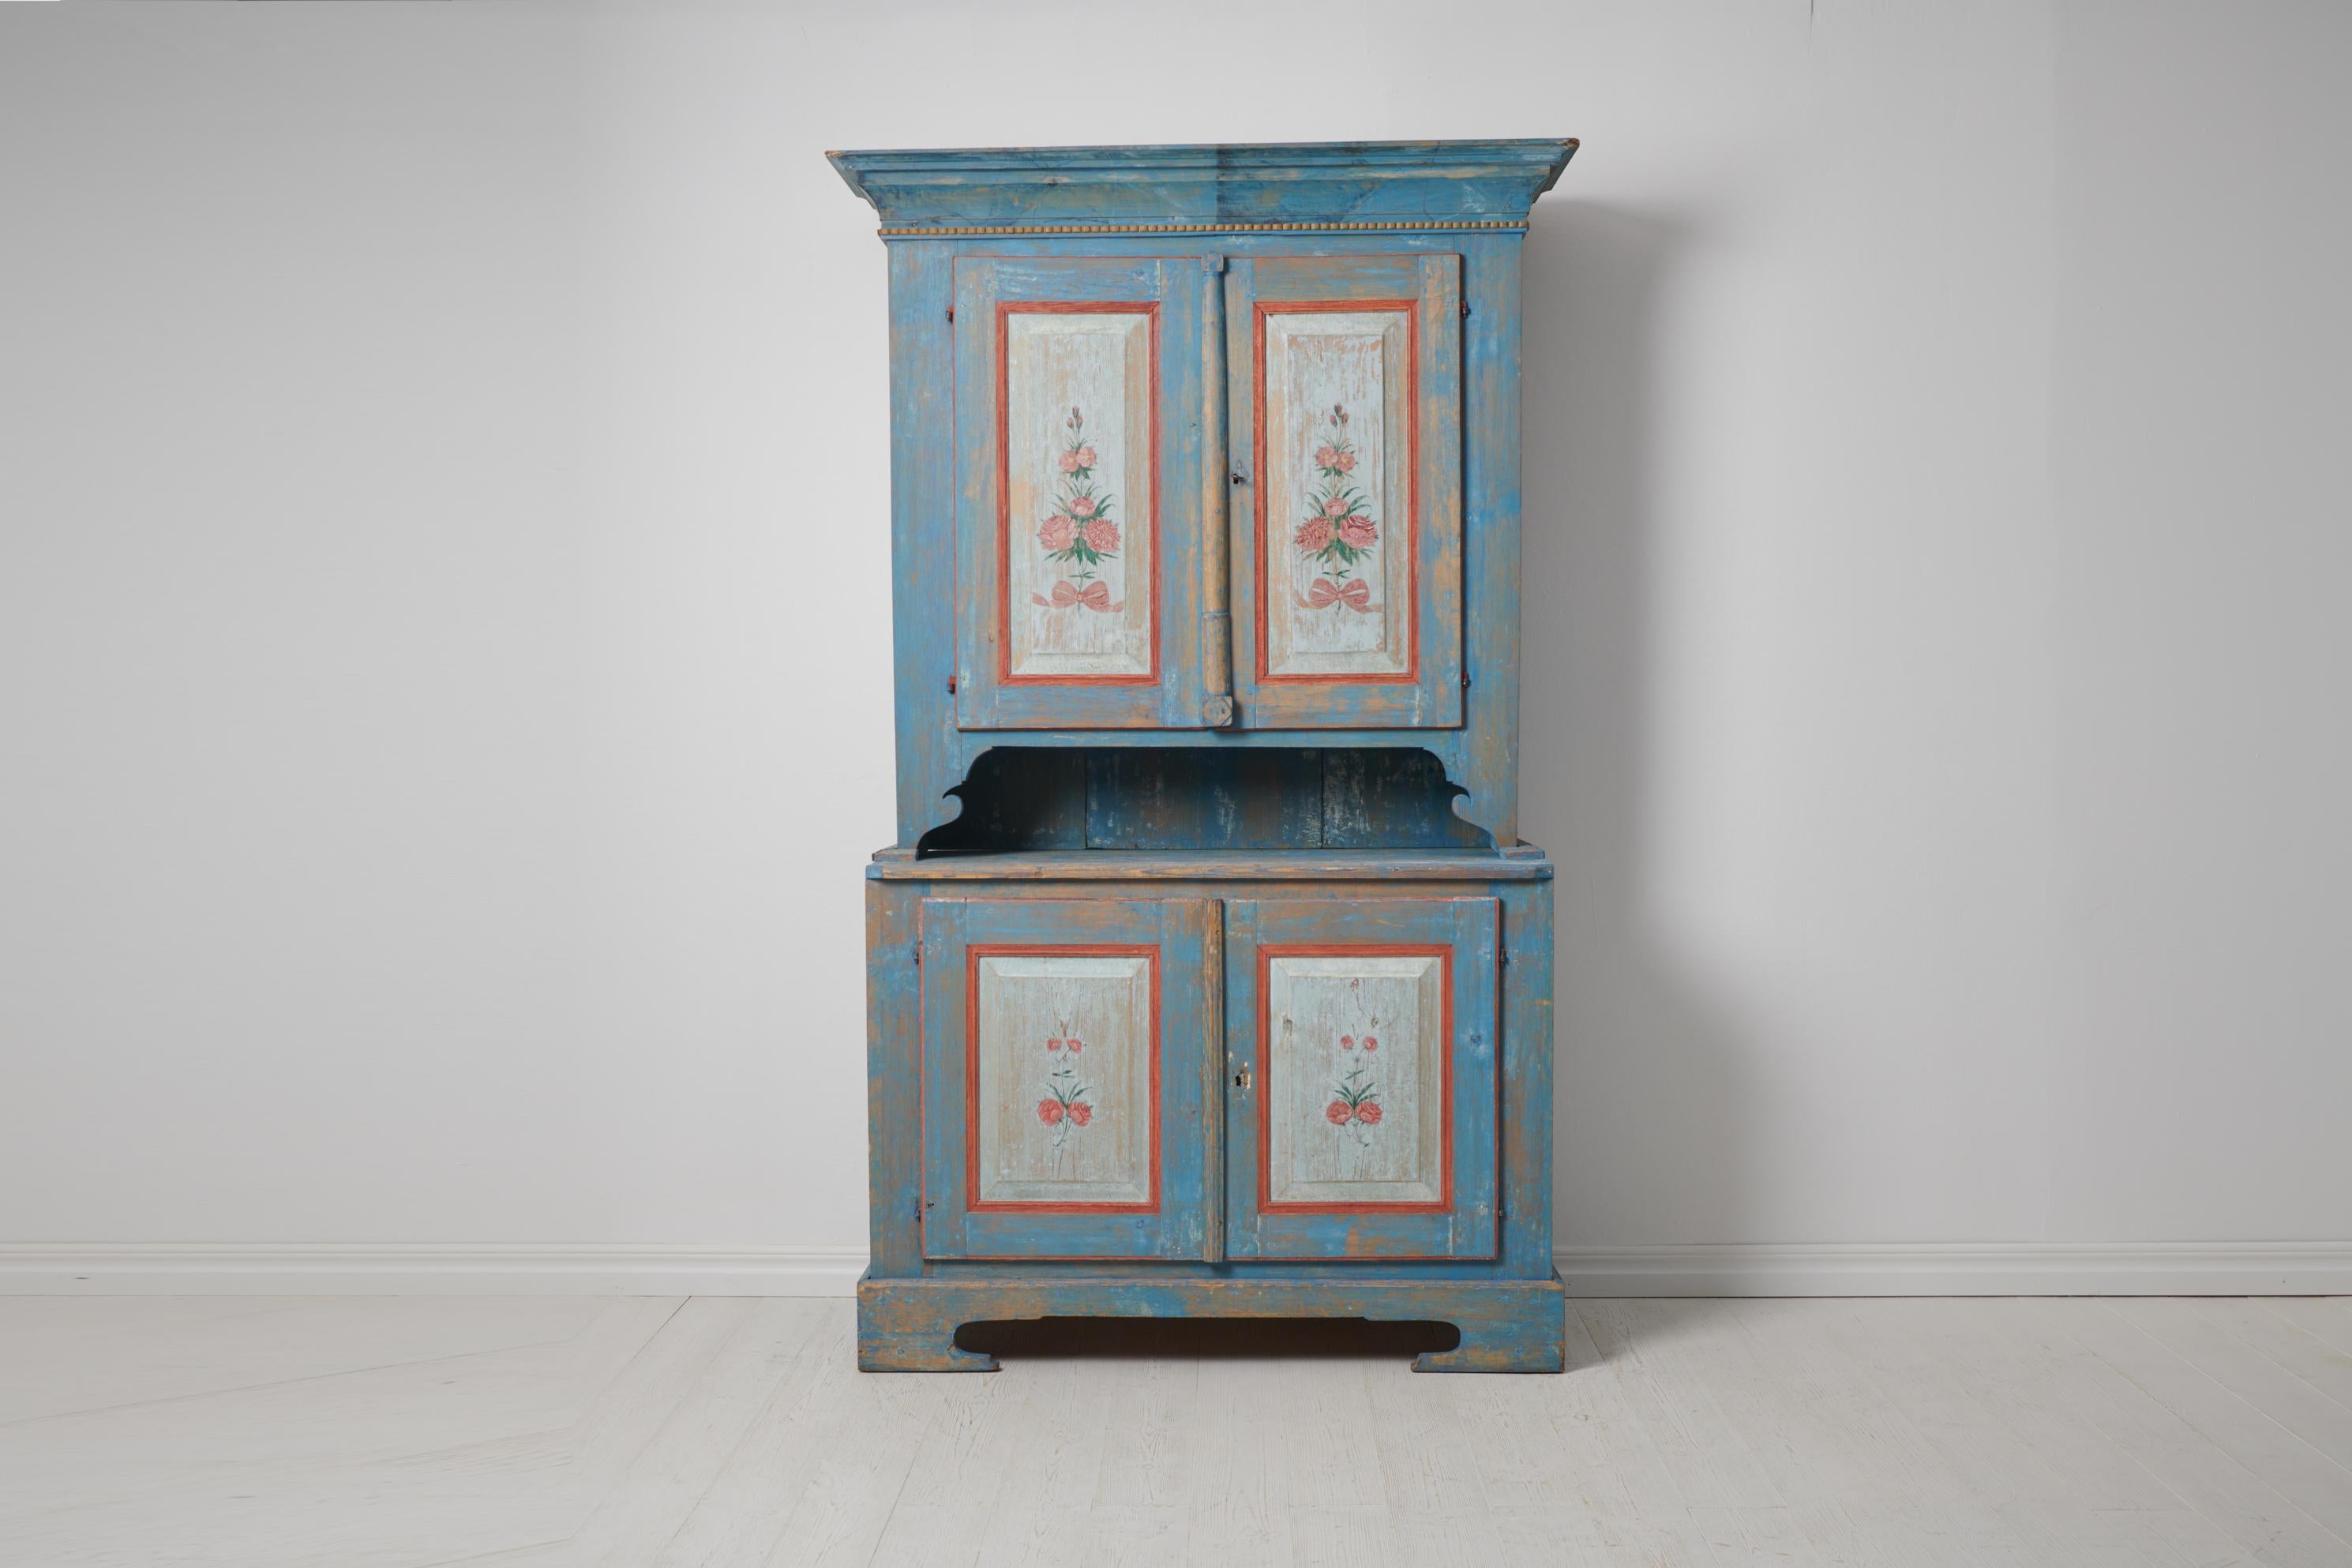 Antique Swedish blue cabinet. The cabinet is a genuine Swedish country house furniture from the early 1800s, around 1820. The cabinet is in two parts and made by hand from solid pine. The paint is original with authentic distress and patina of time.